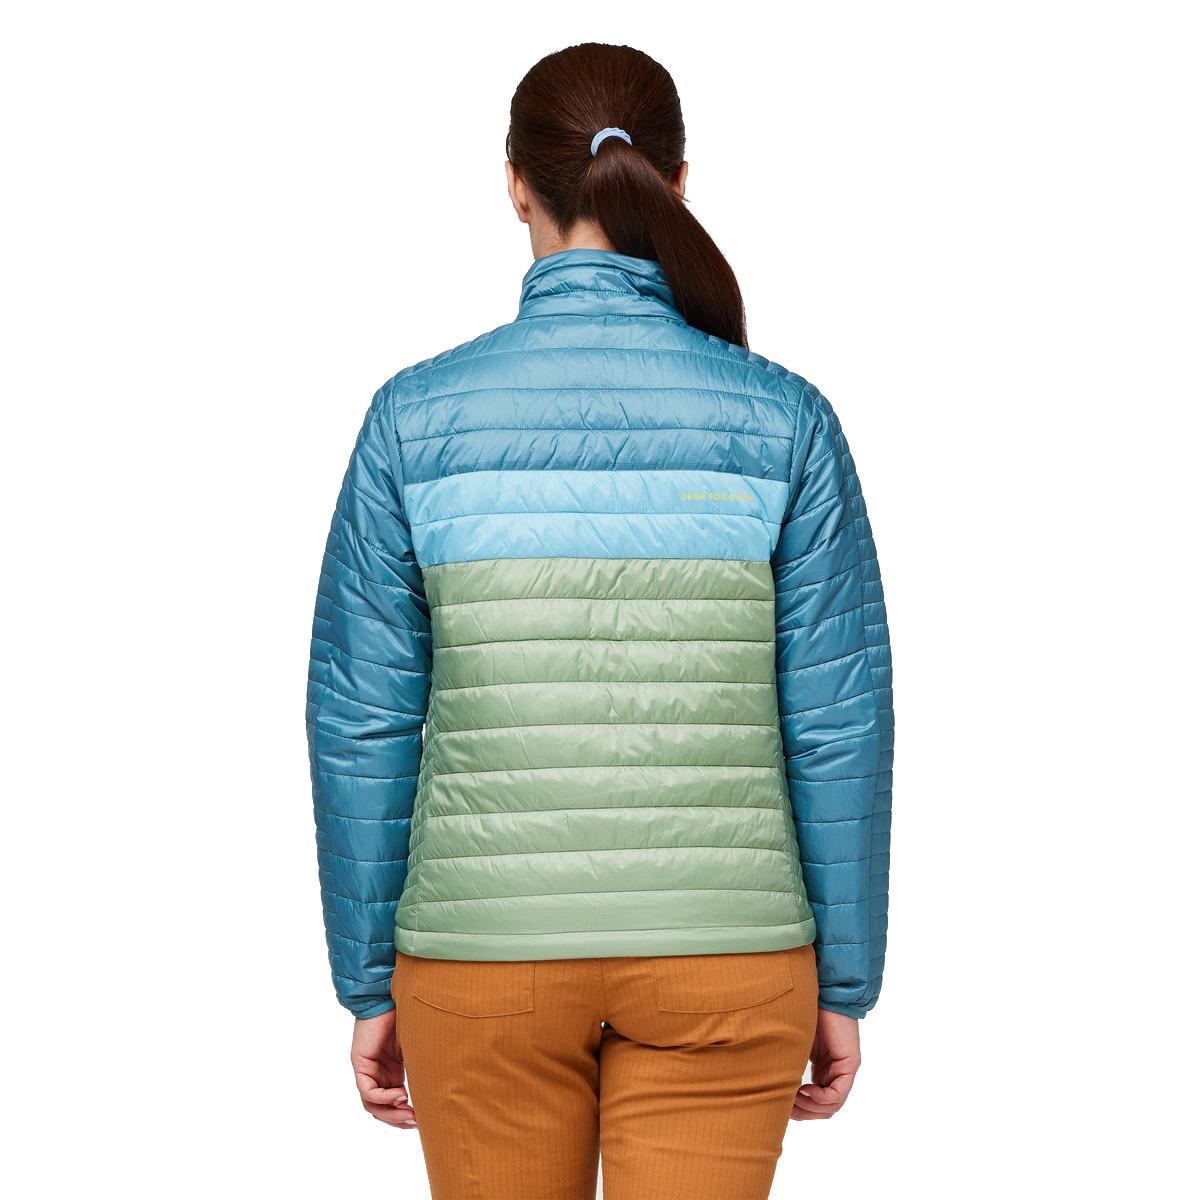 Cotopaxi Capa Insulated Jacket - Women's